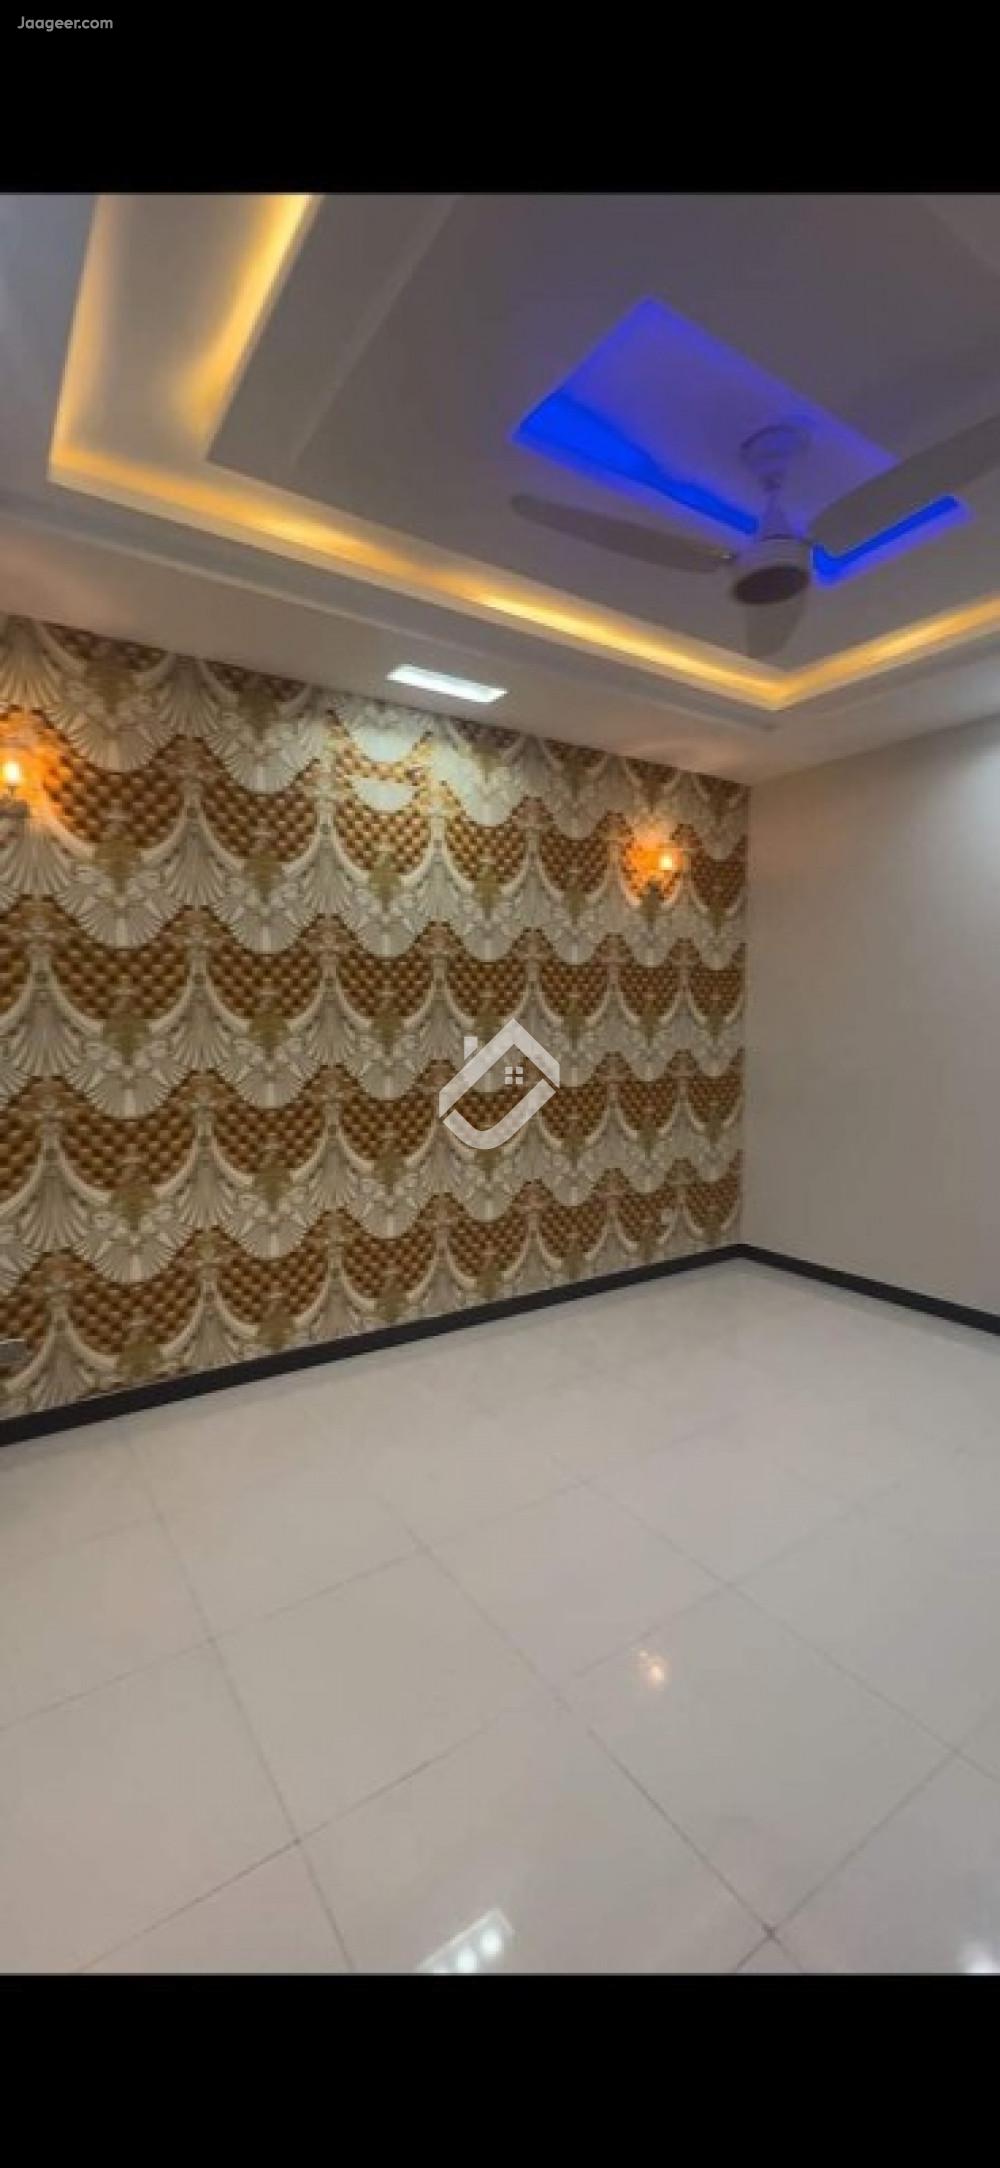 Main image 8 Marla Double Storey House For Sale In Bahria Town  Bahria Town, Lahore